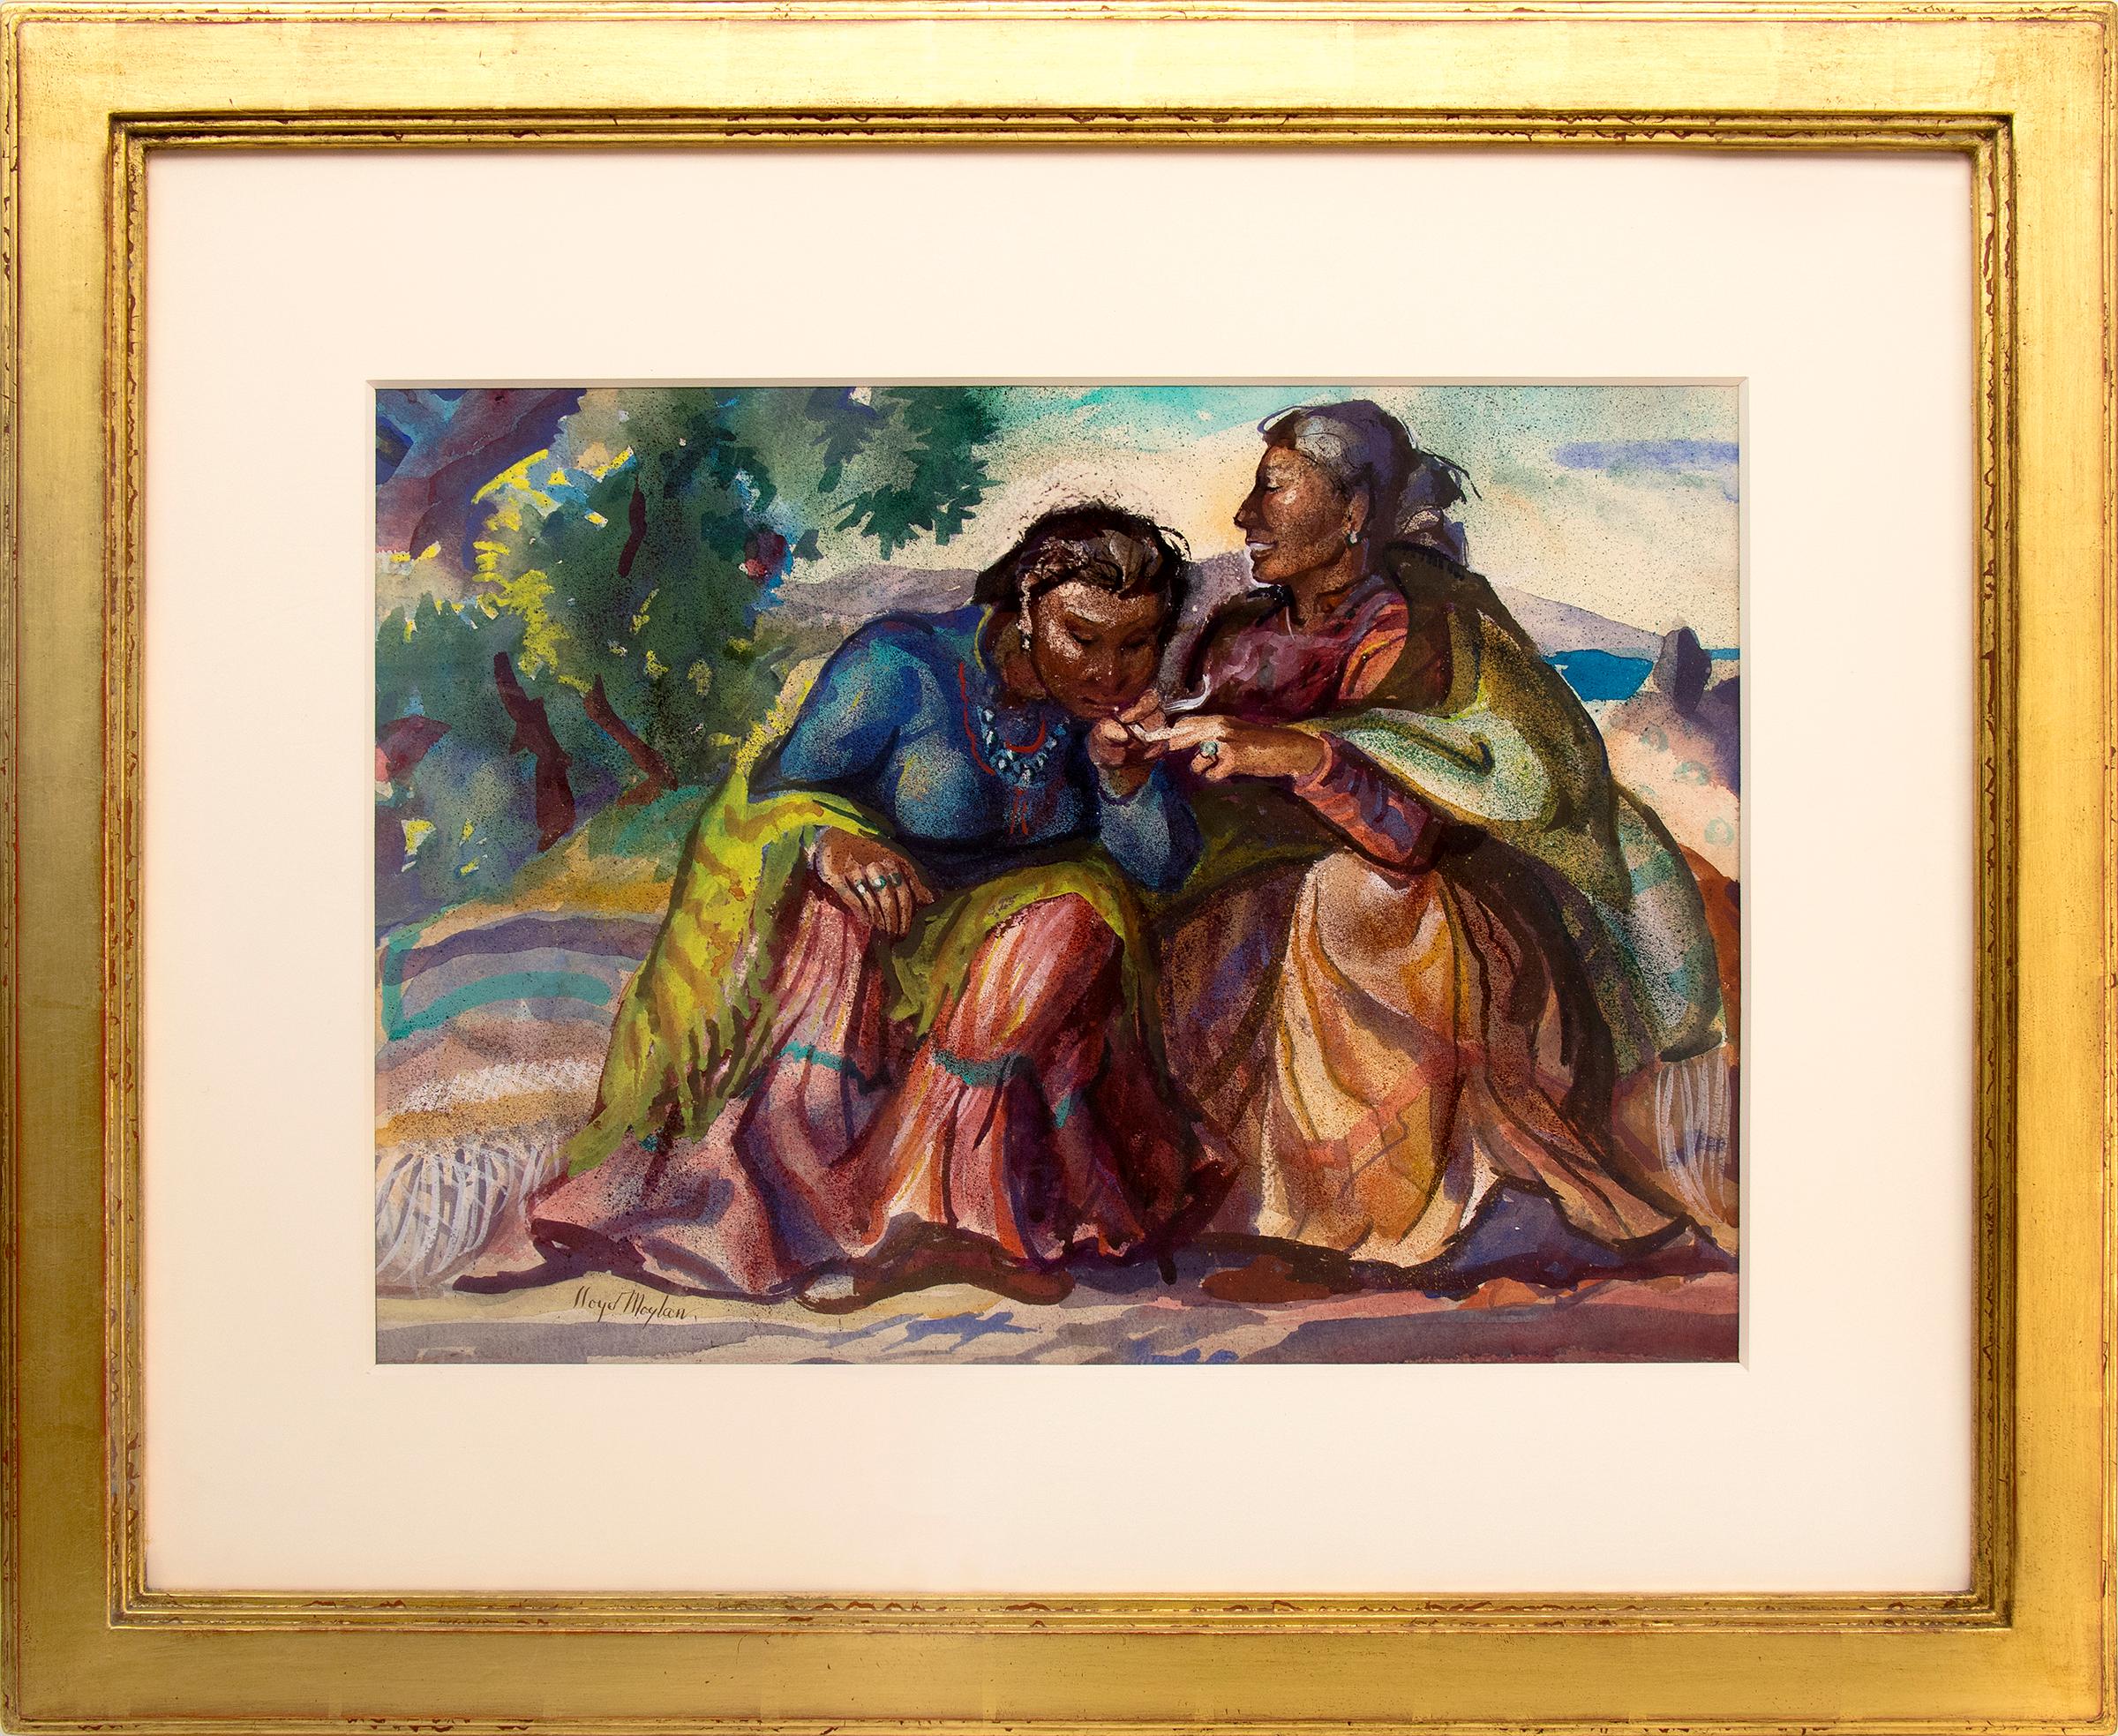 Lloyd Moylan Portrait Painting - Portrait of Two Women, Exterior Figurative Painting, Framed Watercolor Painting 